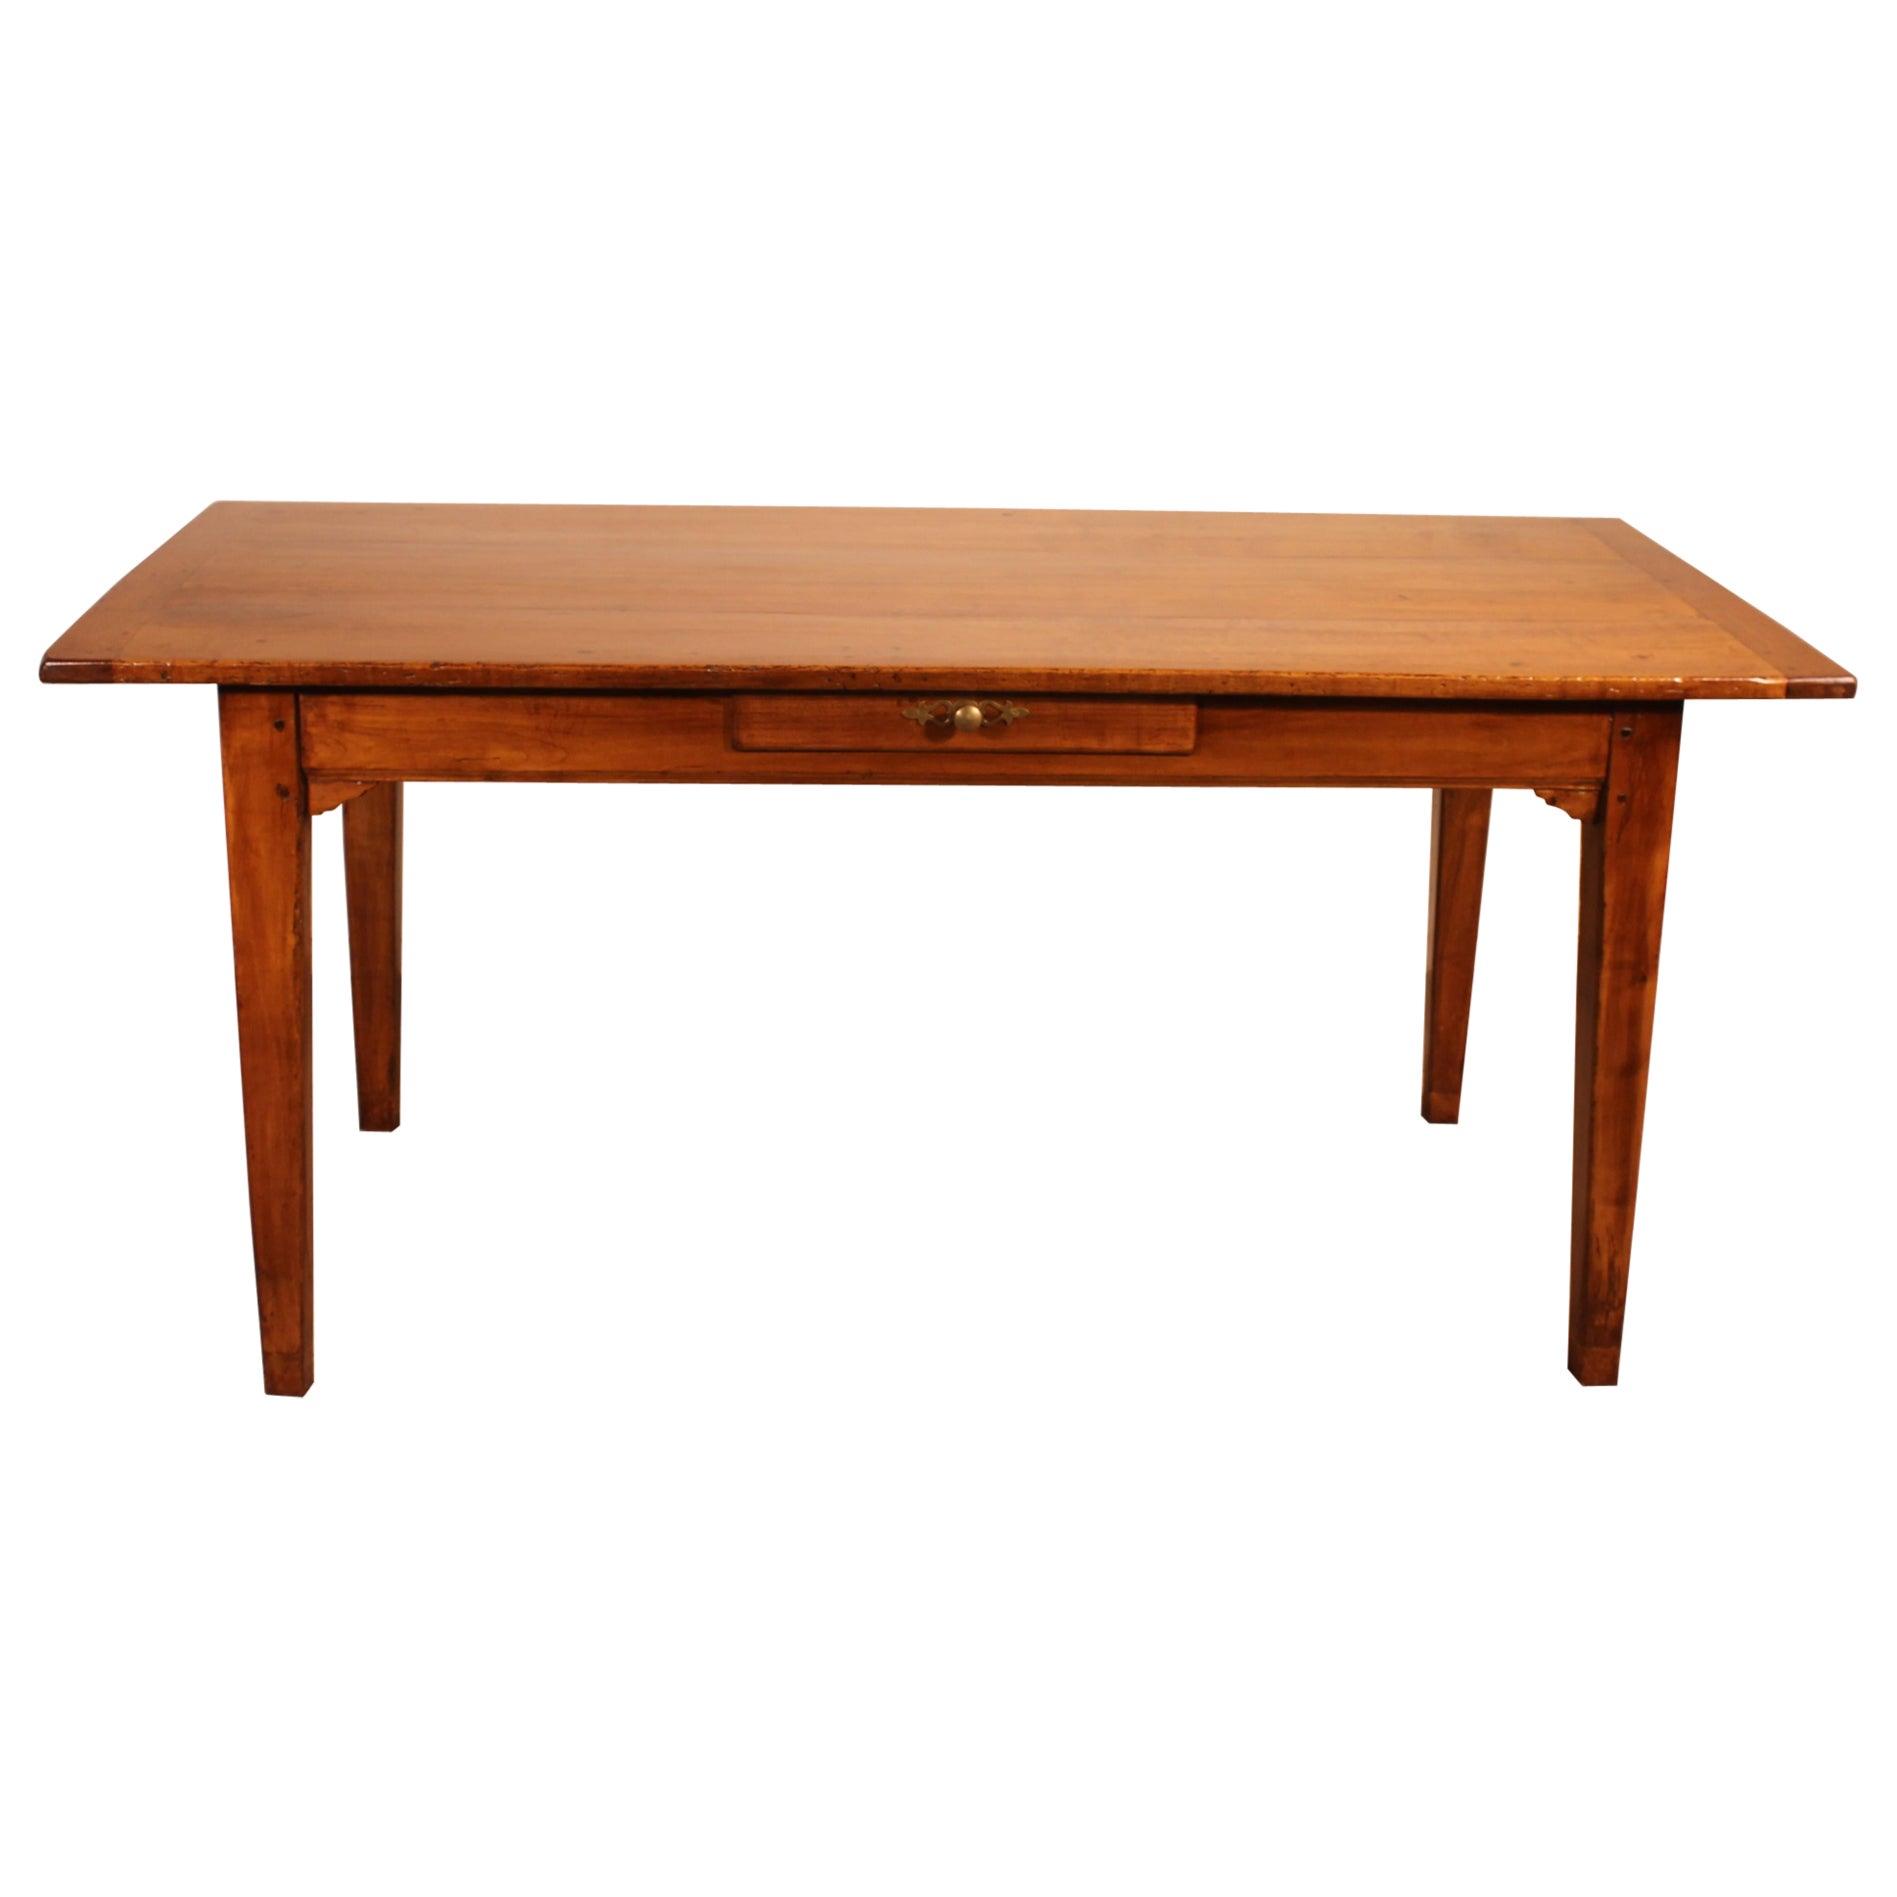 Small Table in Cherry Wood from the 19th Century For Sale